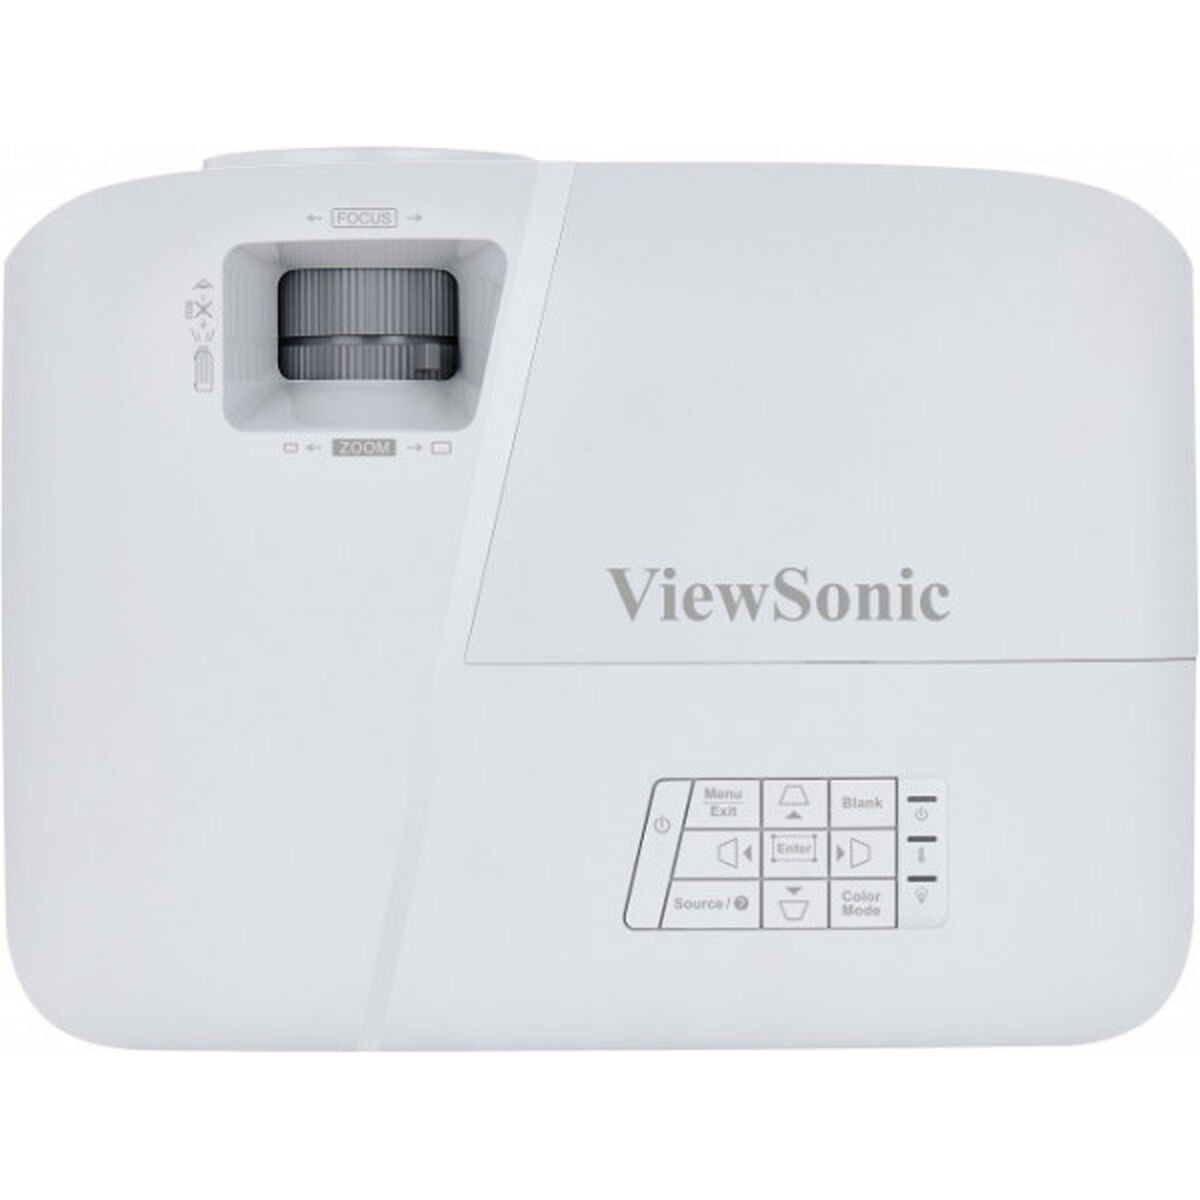 Projector ViewSonic PG707X XGA 4000 Lm, ViewSonic, Electronics, TV, Video and home cinema, projector-viewsonic-pg707x-xga-4000-lm-1, Brand_ViewSonic, category-reference-2609, category-reference-2642, category-reference-2947, category-reference-t-18805, category-reference-t-18811, category-reference-t-19653, cinema and television, computers / peripherals, Condition_NEW, entertainment, office, Price_600 - 700, RiotNook